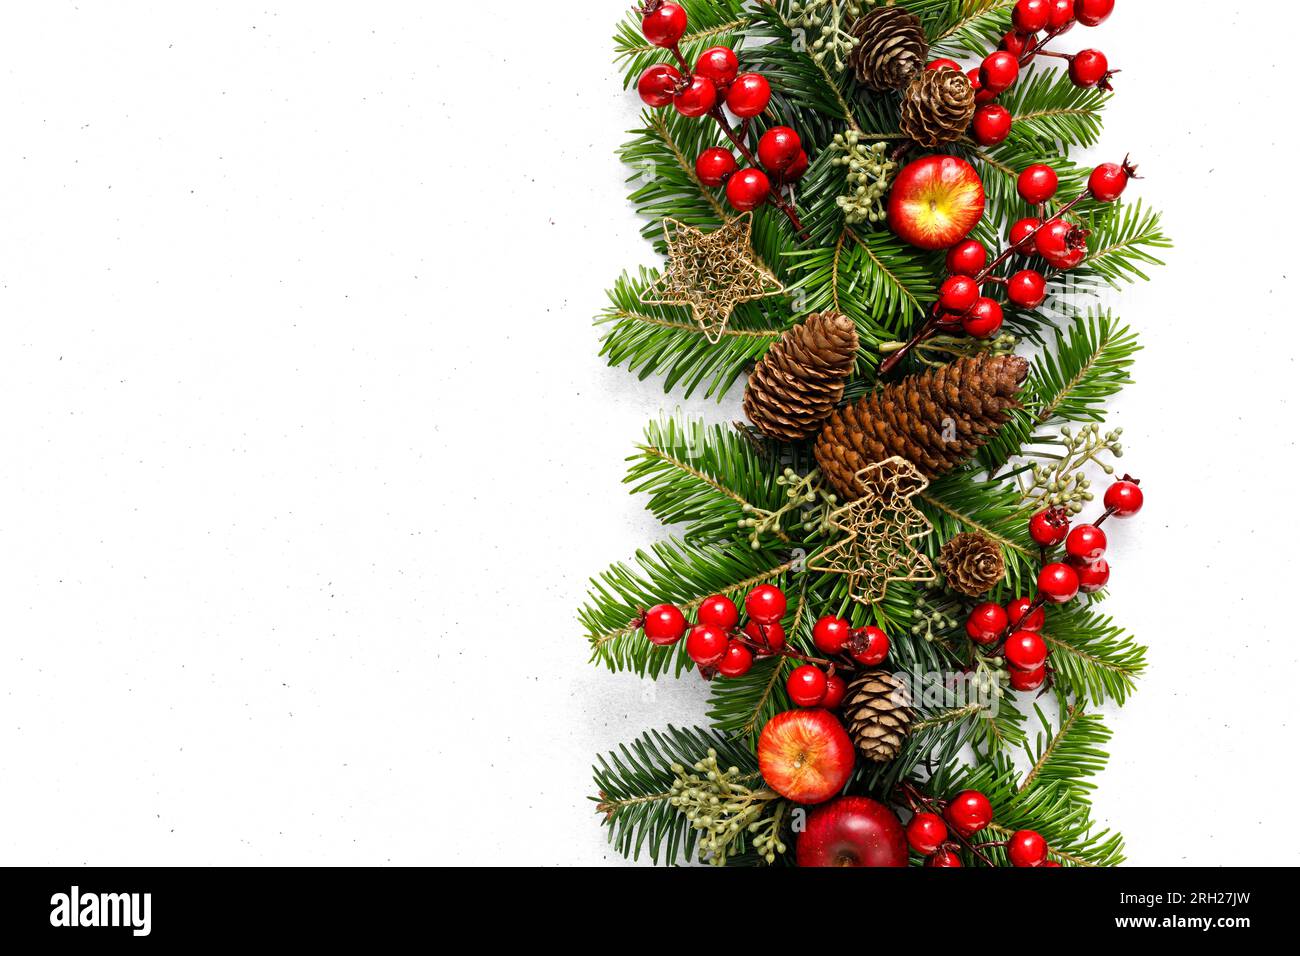 Christmas, Xmas, Noel or New Year background with winter festive Christmas holiday decoration on Christmas tree branches with copy space for a text of Stock Photo